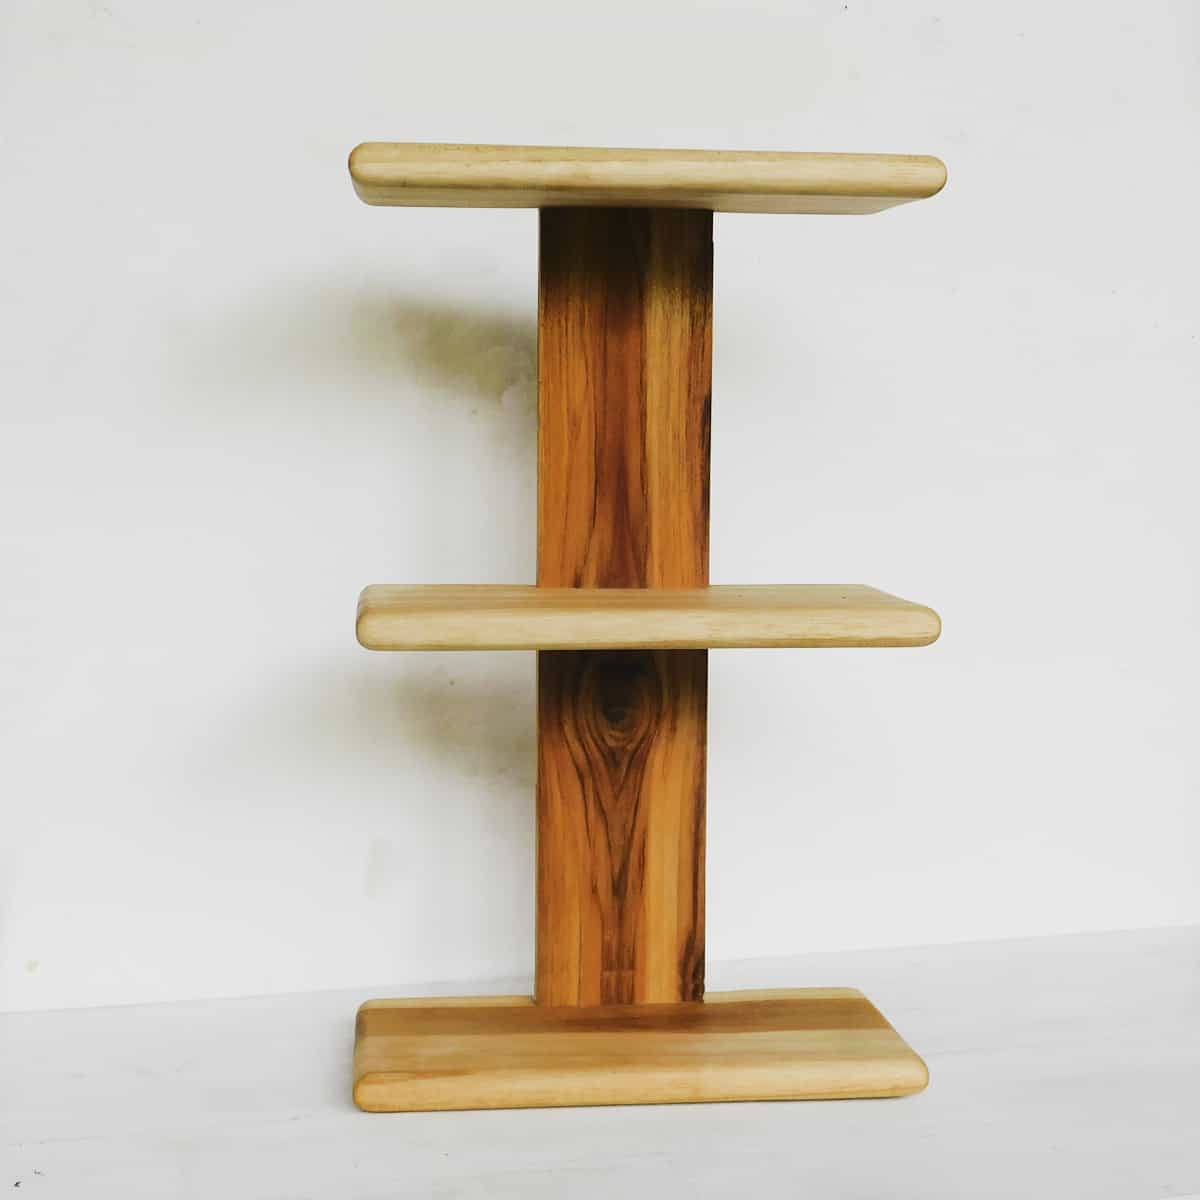  teak wood shelves in three tiers on a white background